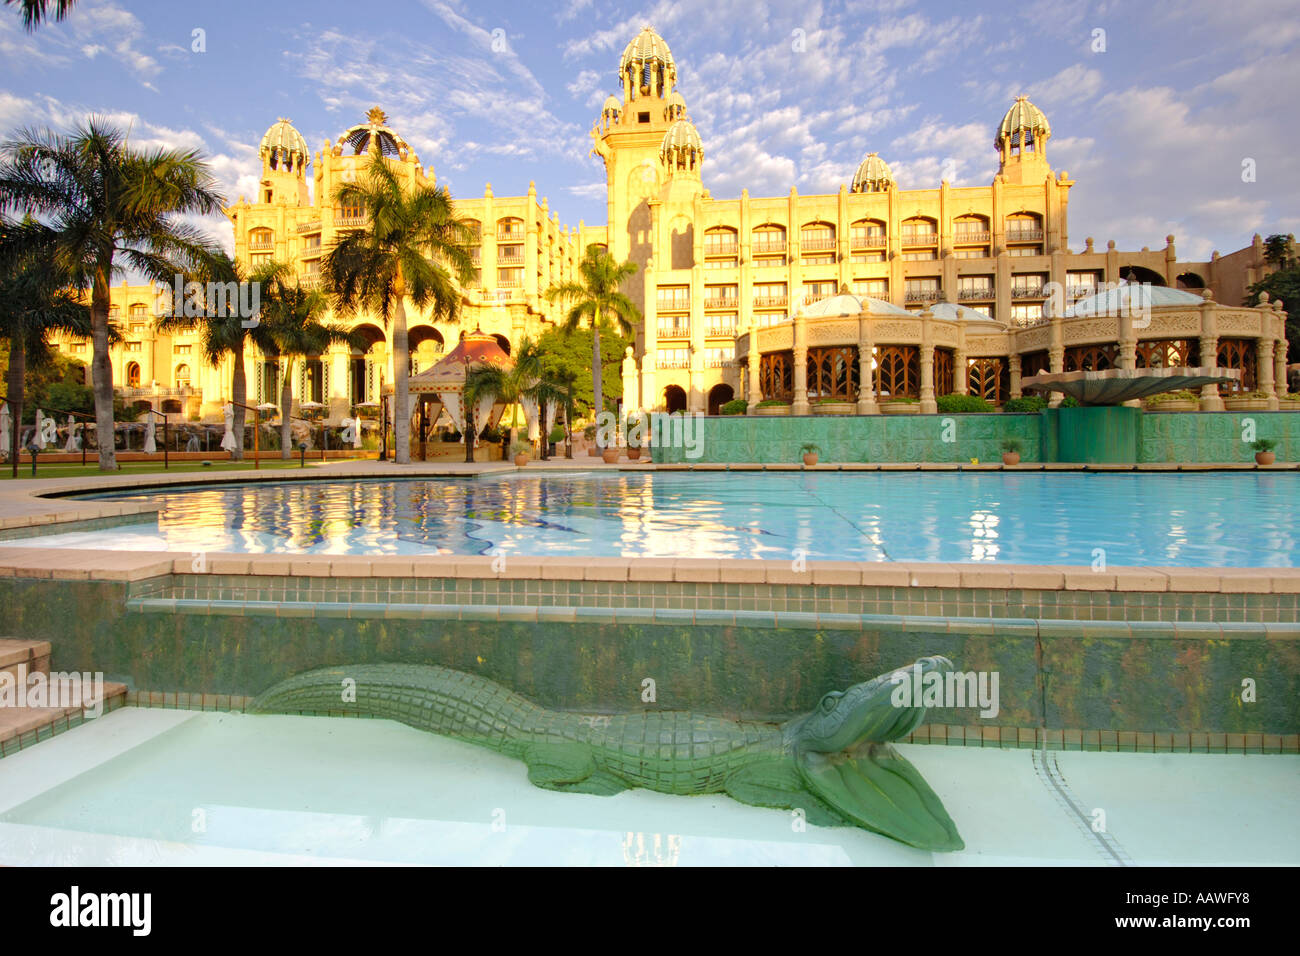 A dawn view of the swimming pool outside the Palace of the Lost City hotel in the Sun City resort in South Africa. Stock Photo